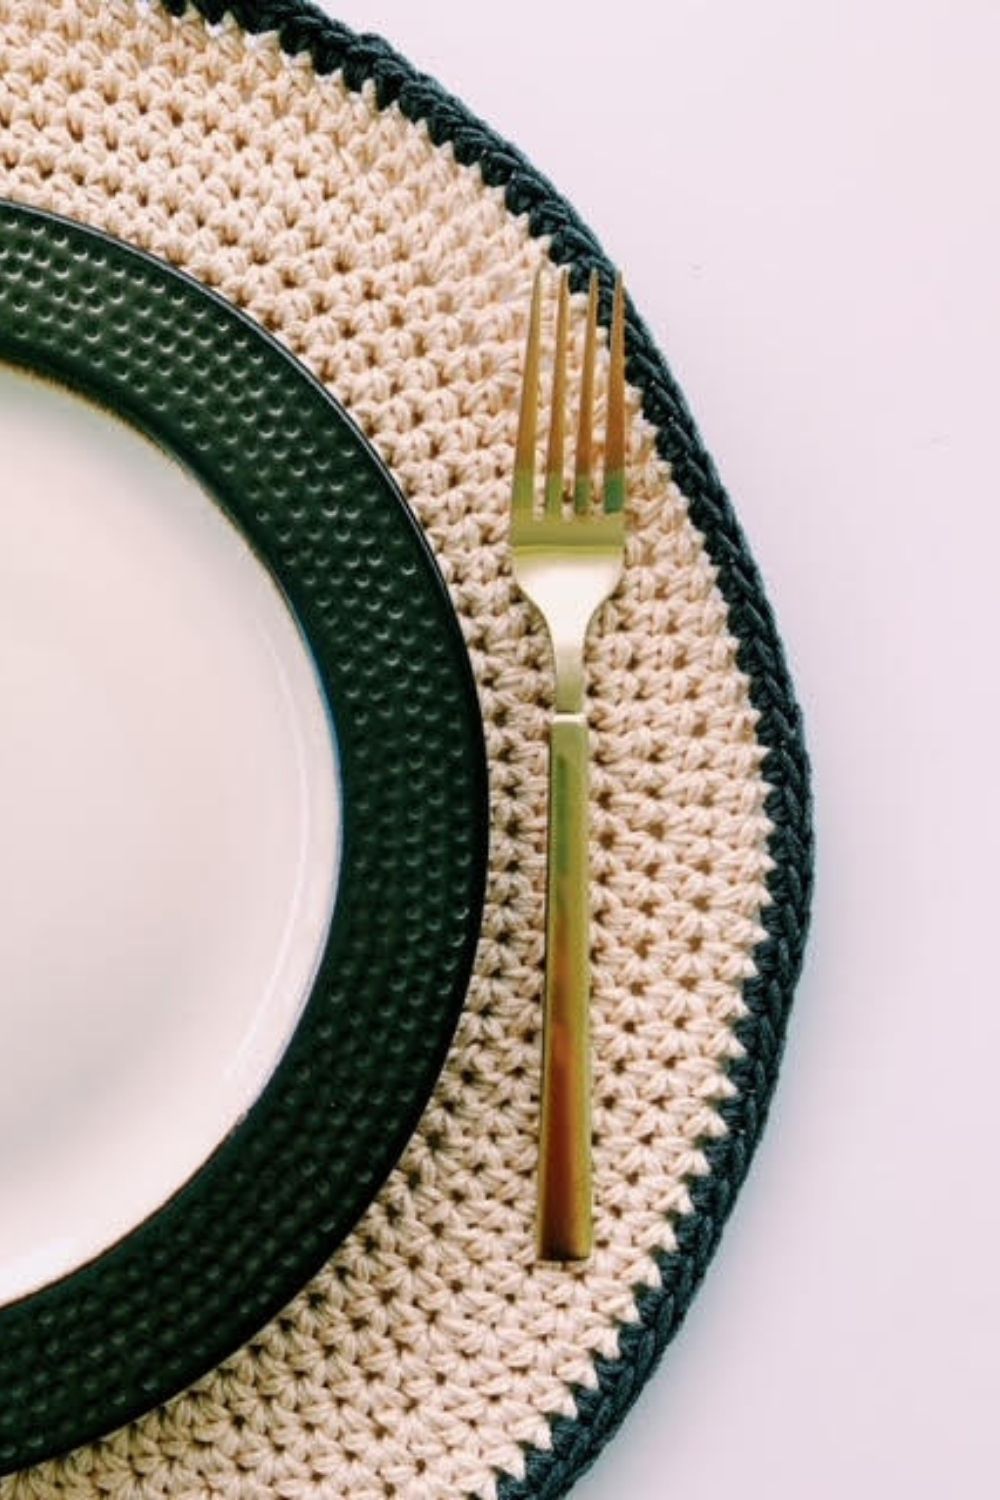 Easy Crochet Placemat Pattern with Cotton Yarn